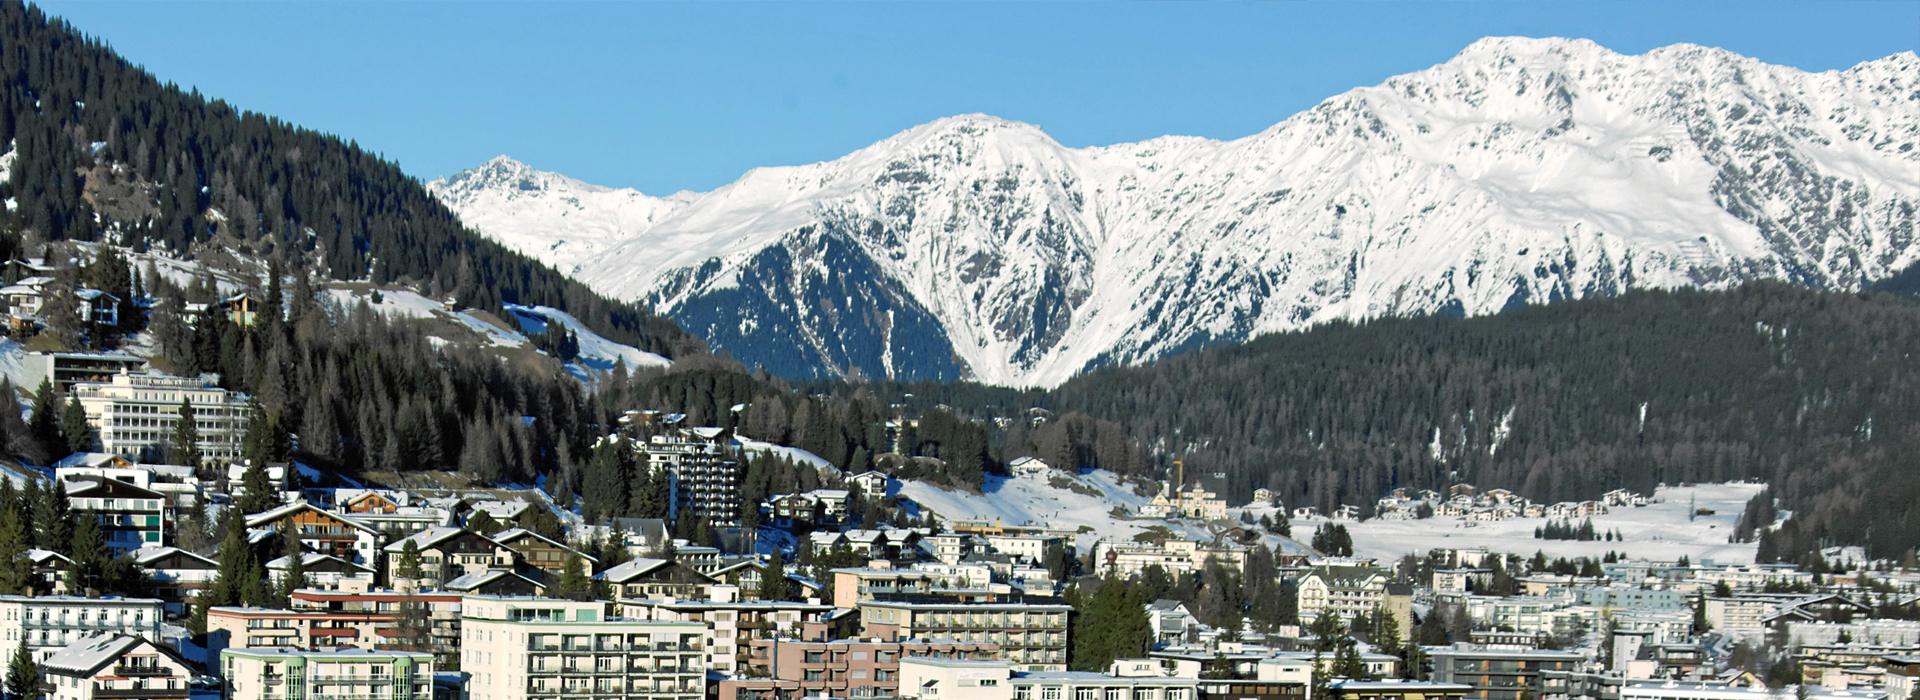 How to get to St. Moritz for Skiing